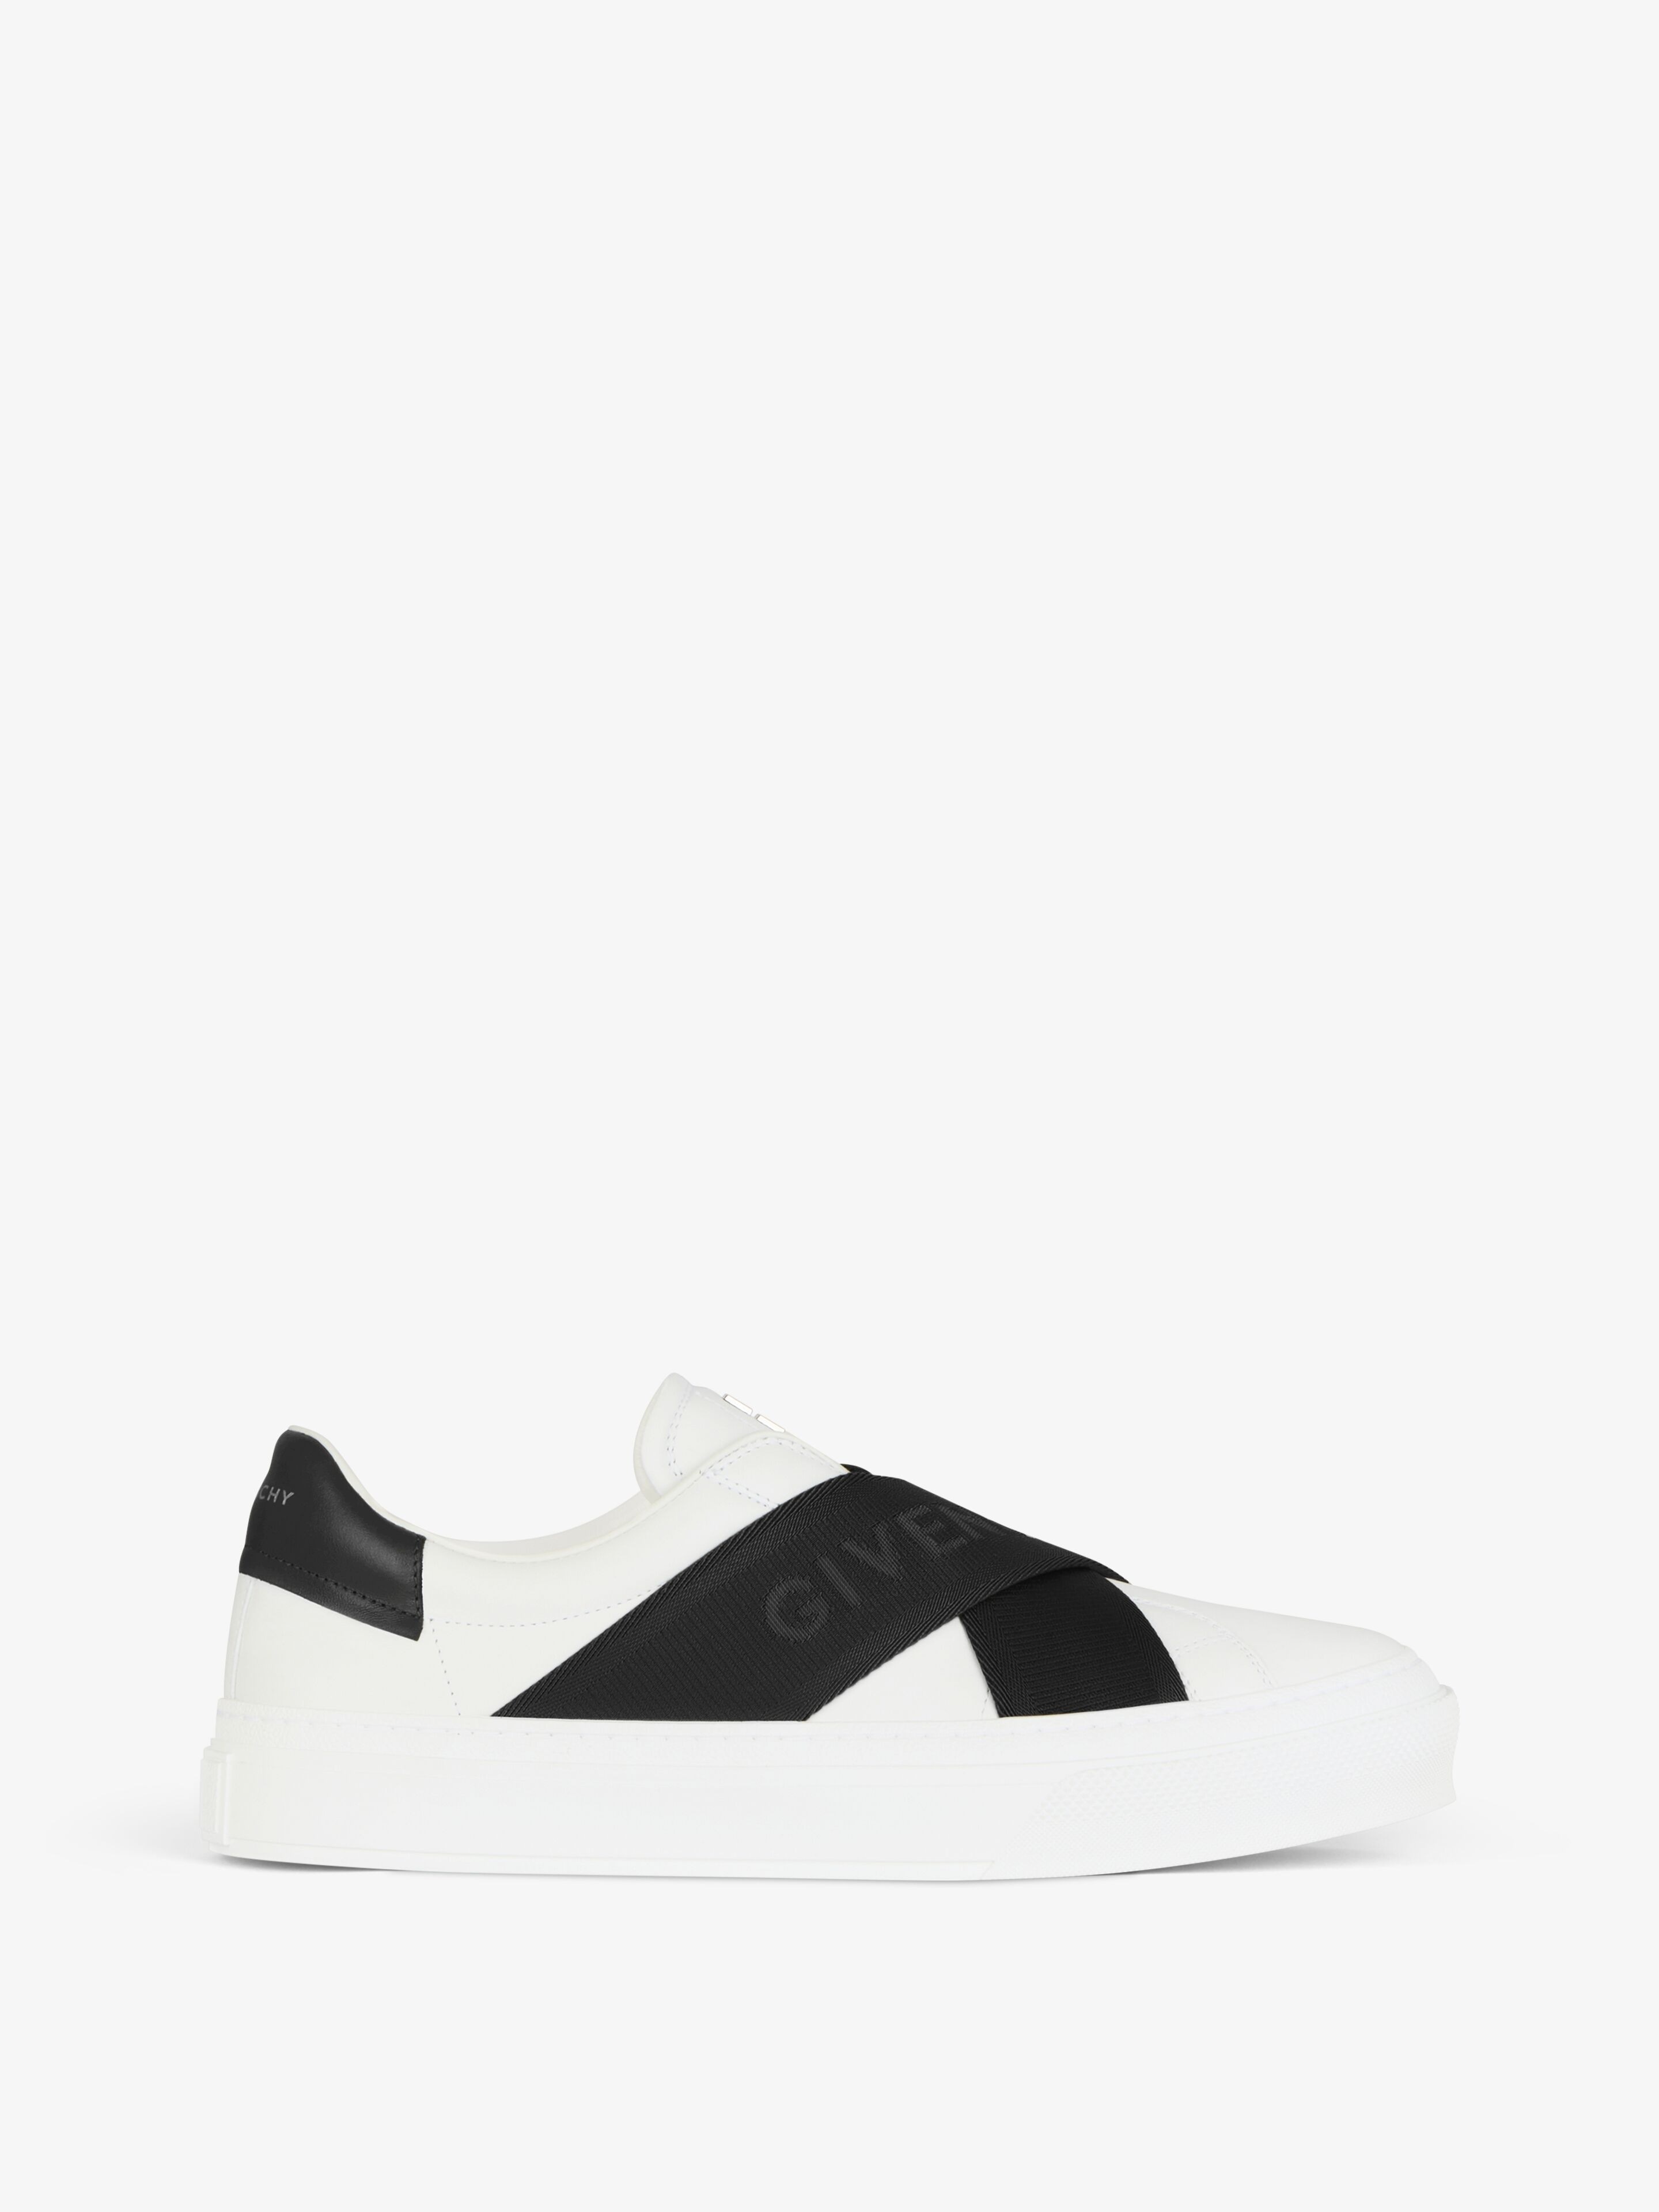 CITY SPORT SNEAKERS IN LEATHER WITH DOUBLE WEBBING STRAP - 1